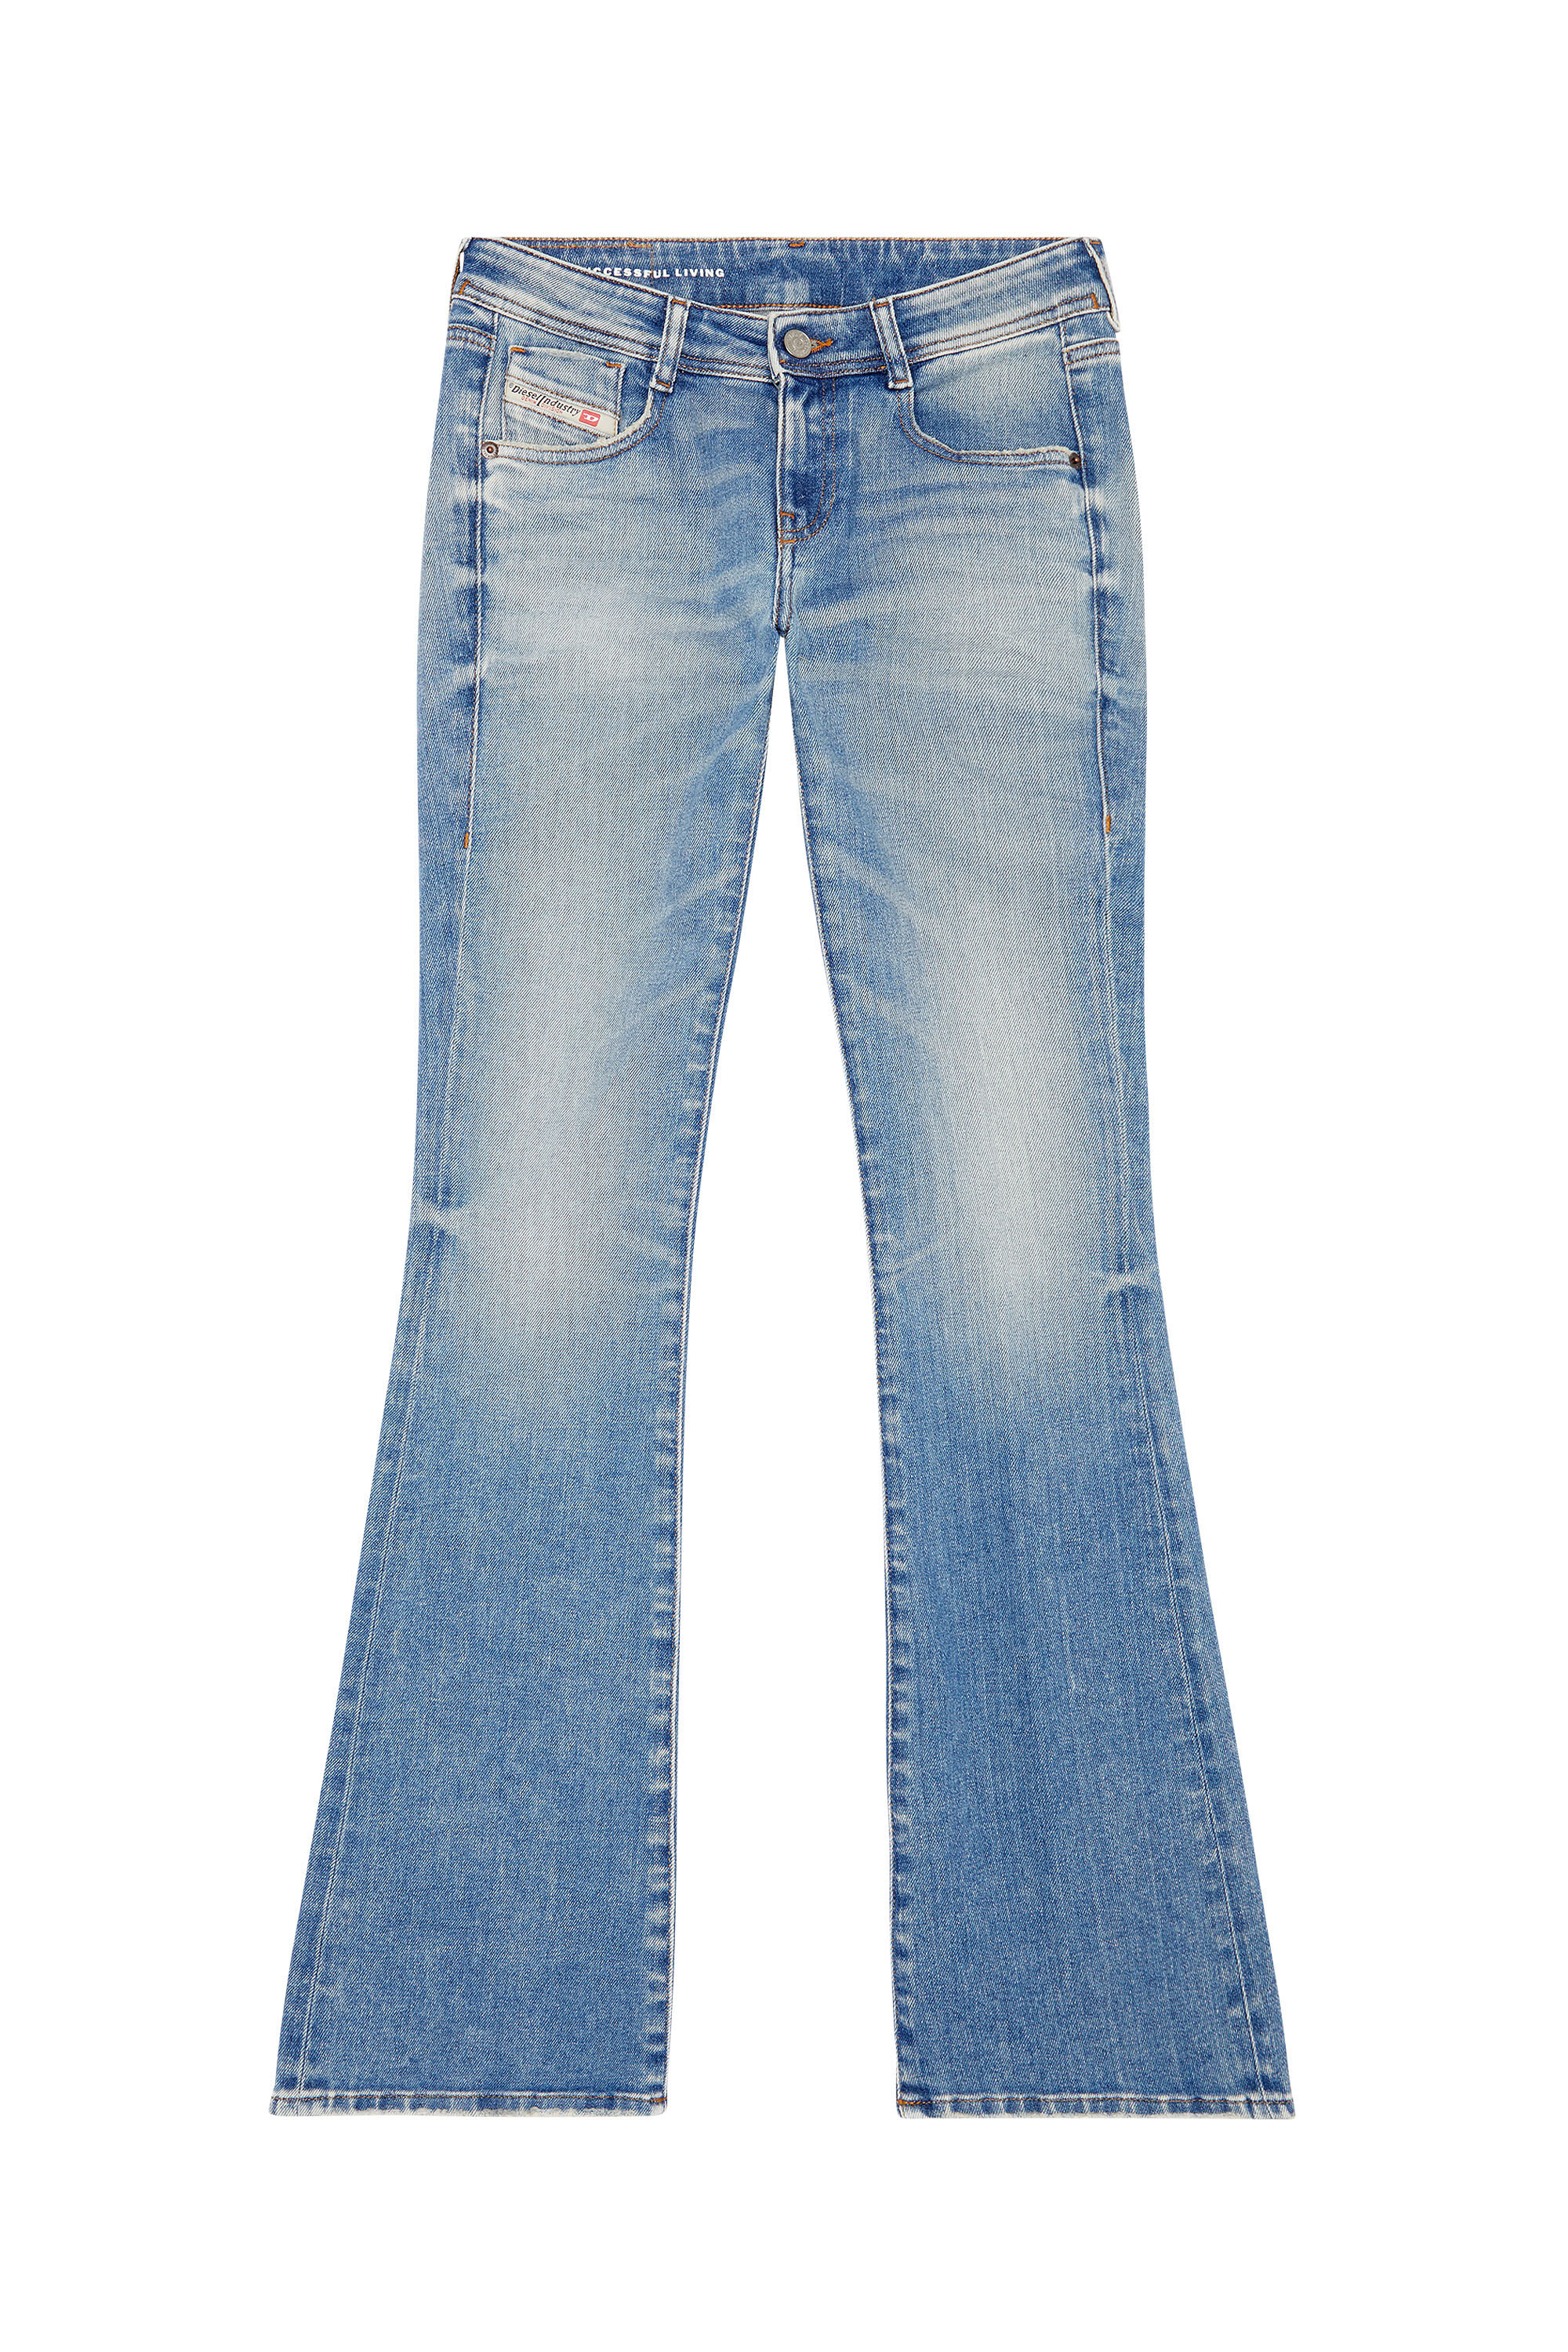 Buy Blue Stretch Flare Jeans from the Next UK online shop